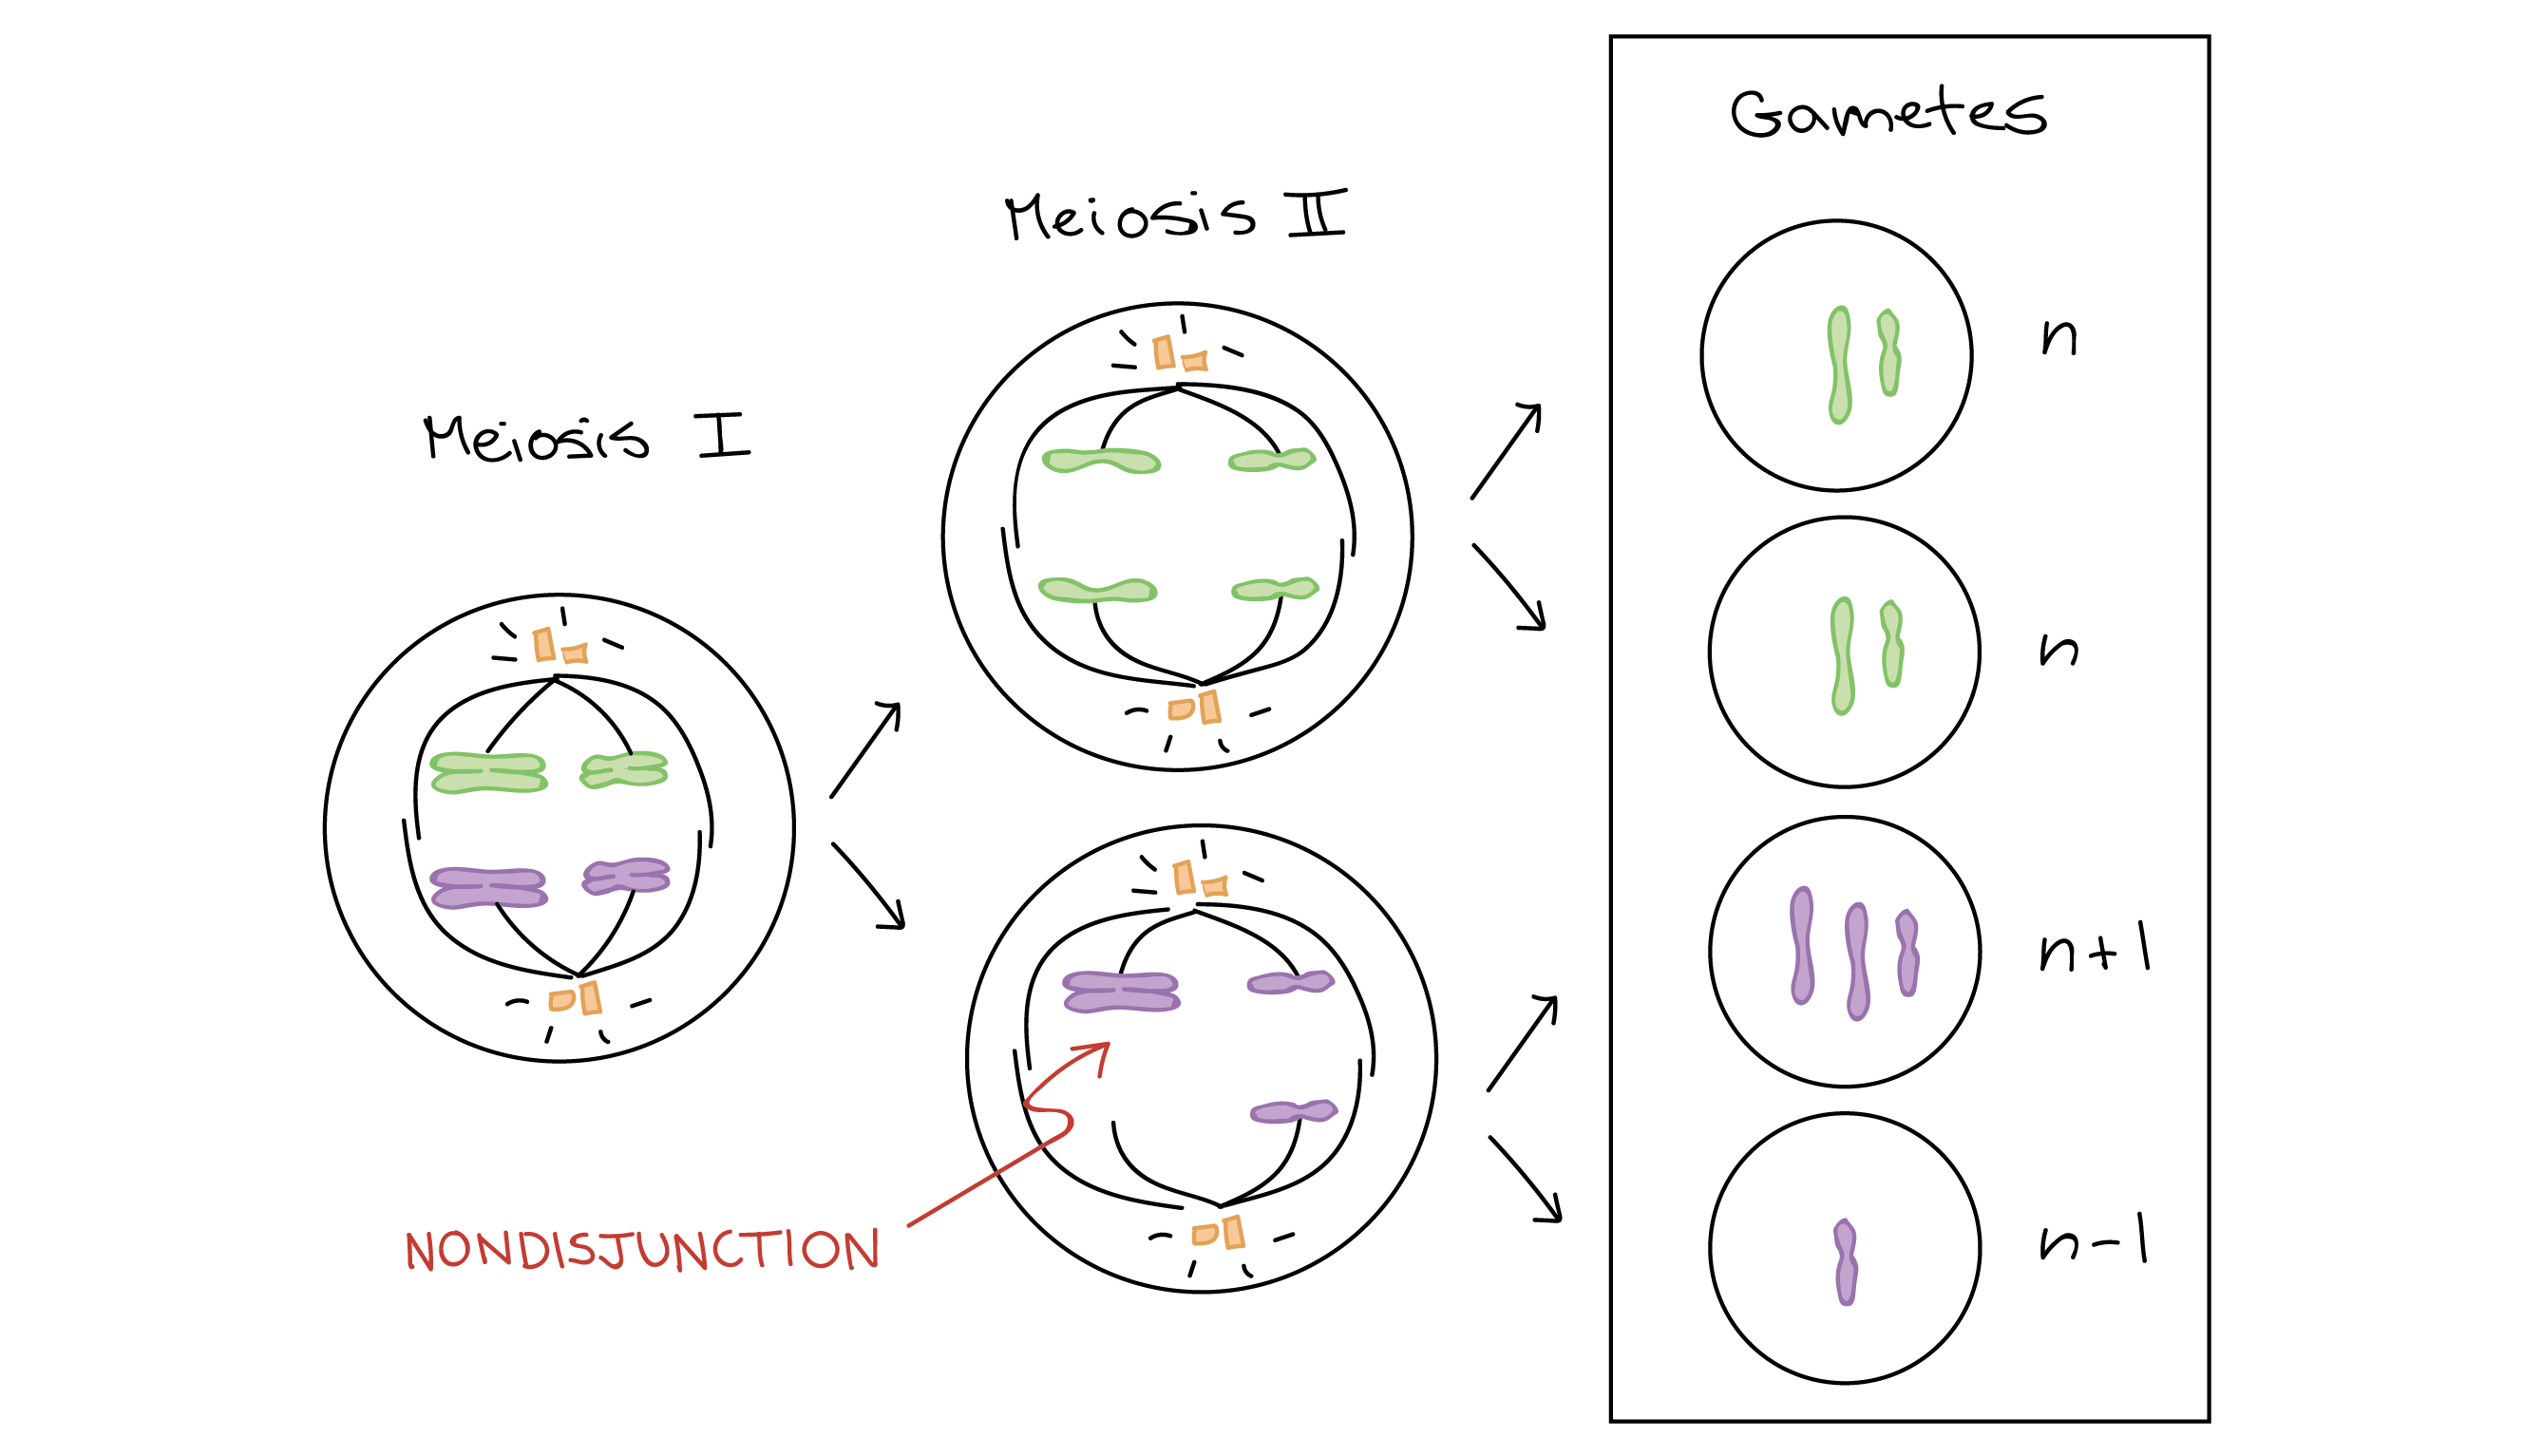 Diagram depicting nondisjunction in meioisis II. Homologous chromosomes separate normally during meiosis I. However, the sister chromatids of one chromosome fail to separate during meiosis II, and instead move to the same pole of the cell and are segregated into the same gamete. In this case, the products of meiosis are two normal, euploid gametes (n), one gamete with an extra chromosome (n+1), and one gamete with a missing chromosome (n-1).